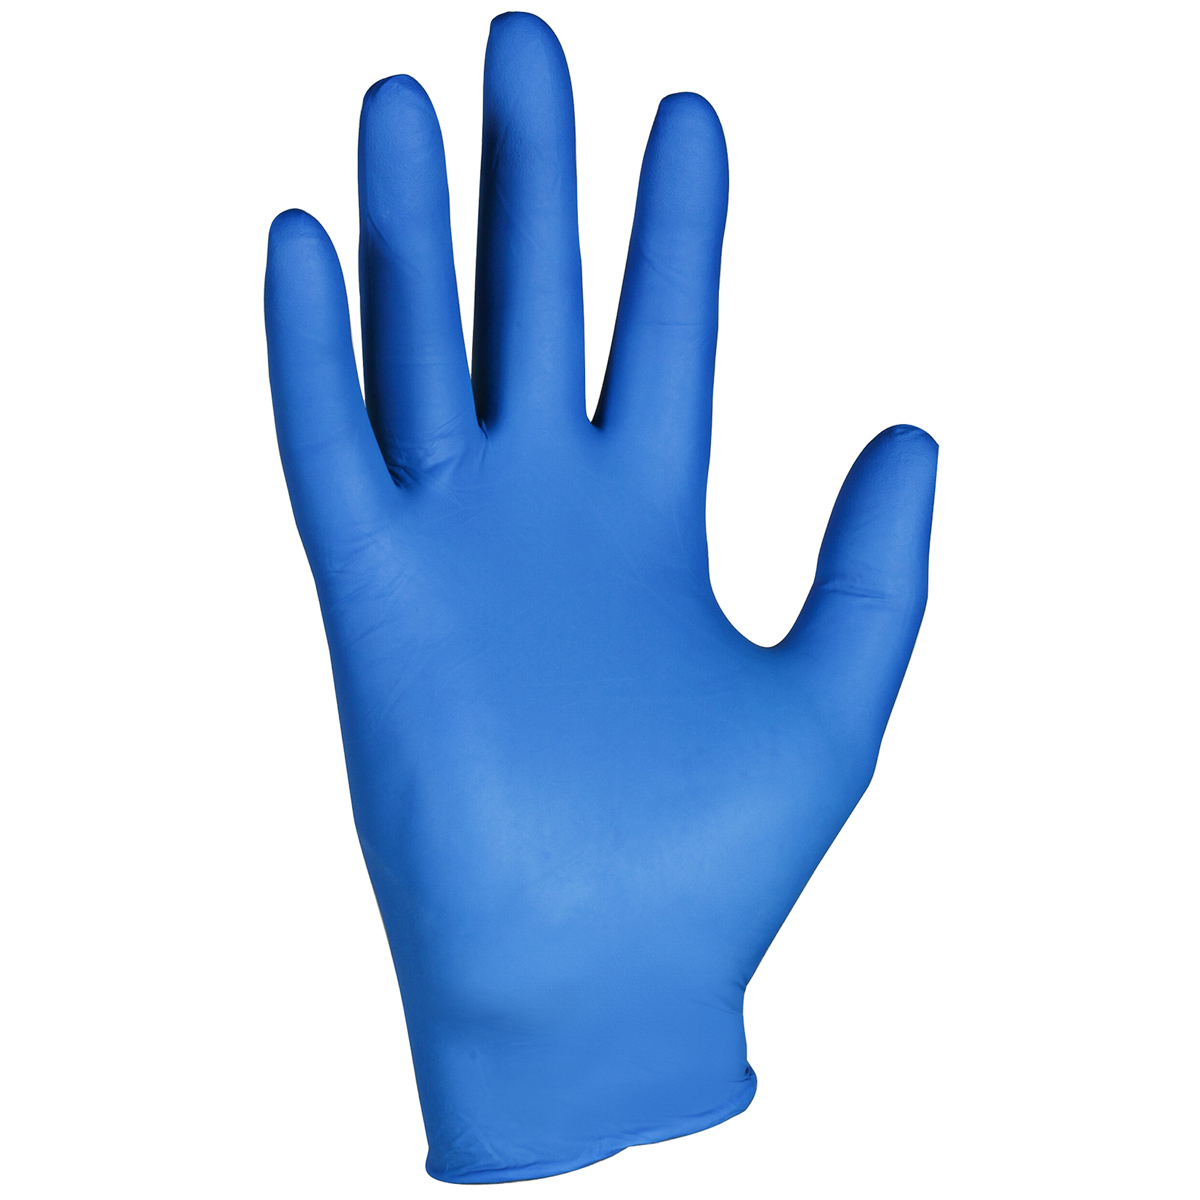 Kimberly-Clark Professional* X-Small Blue KleenGuard™ G10 2 mil Nitrile Disposable Gloves (200 Gloves Per Box) (Availability res